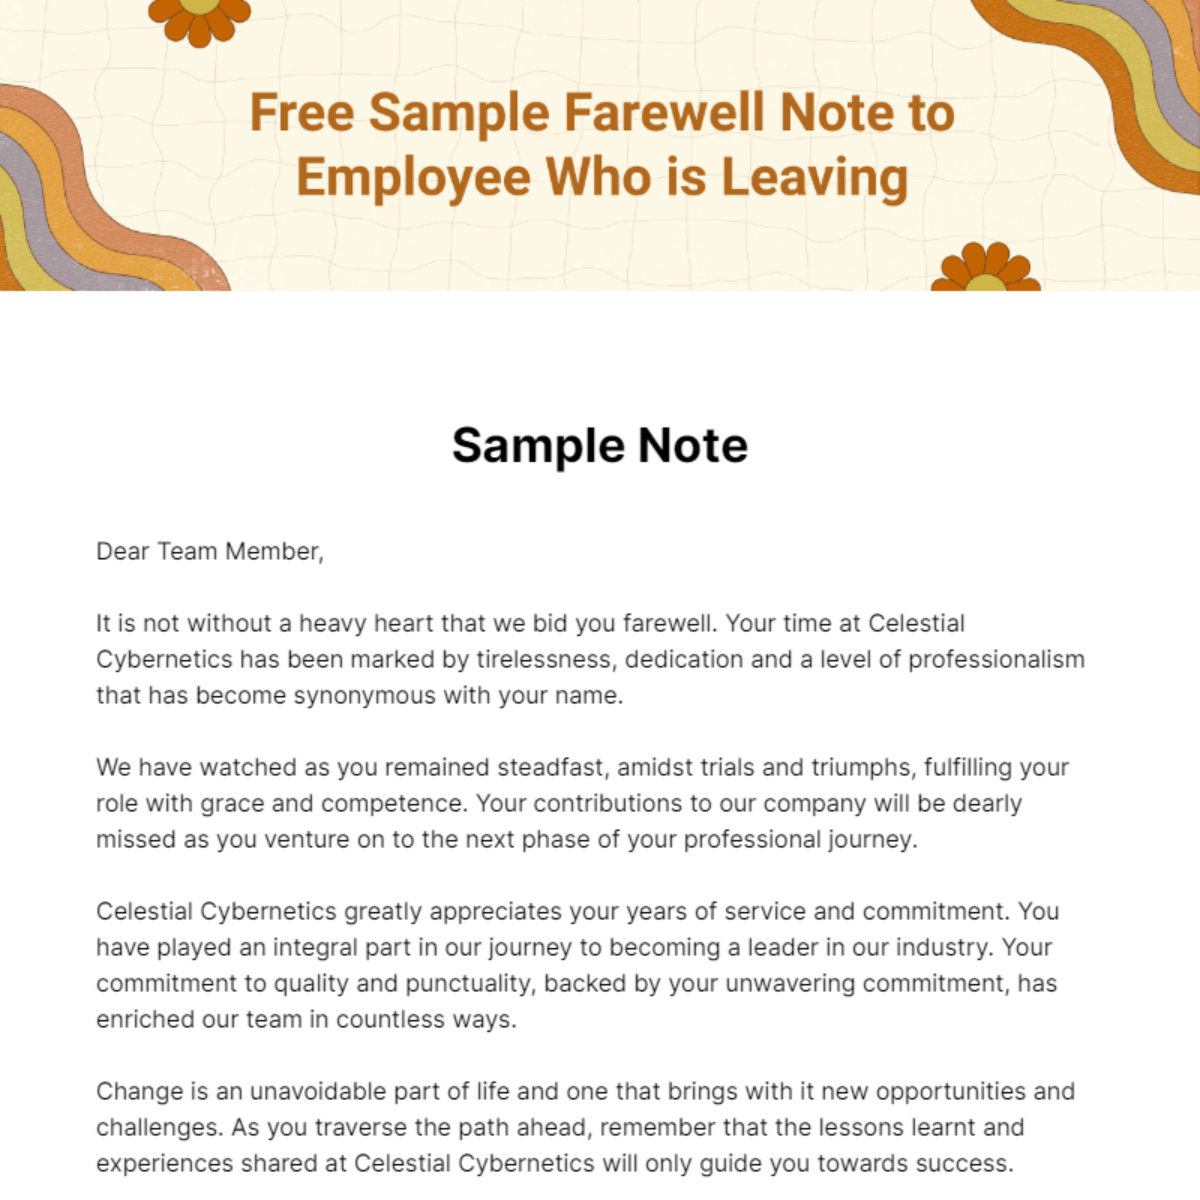 Free Sample Farewell Note to Employee Who is Leaving Template